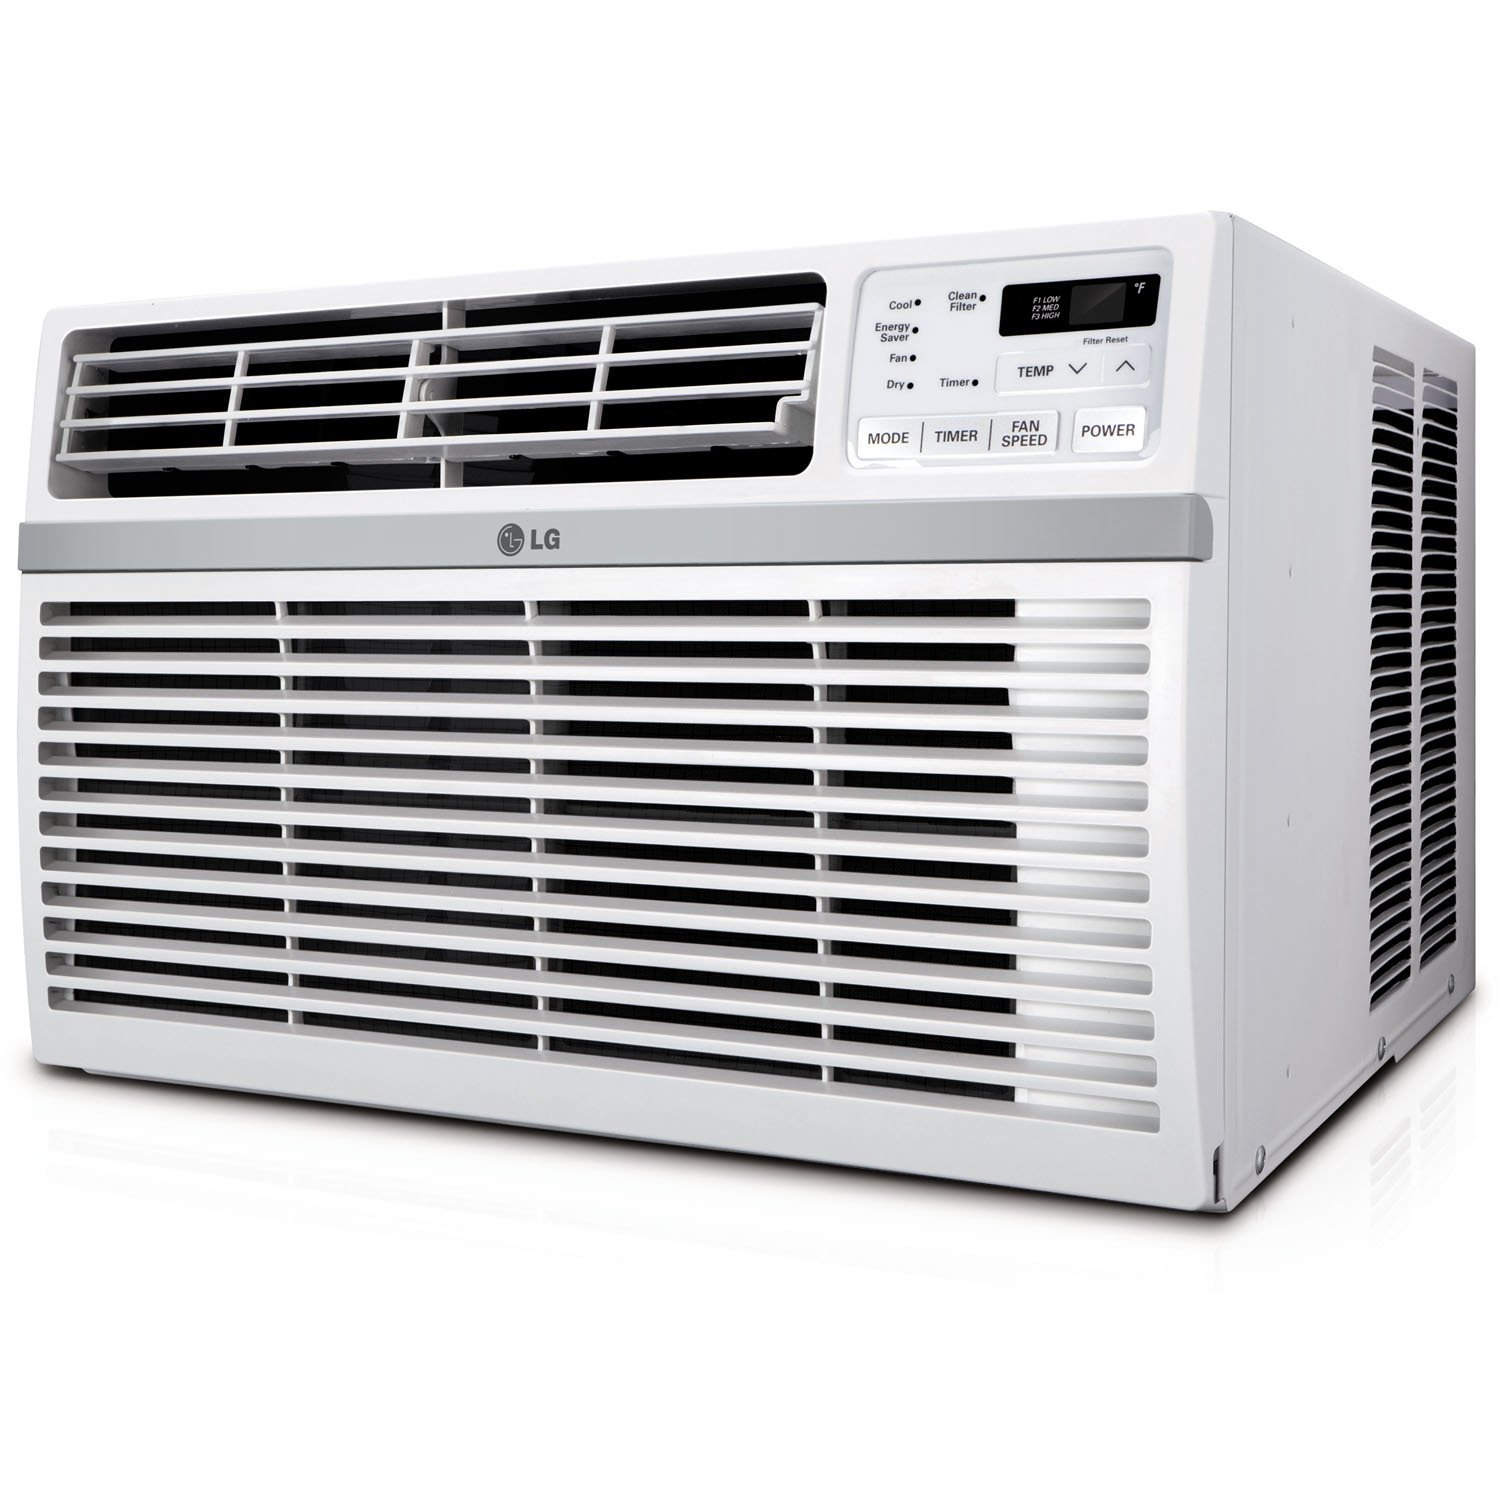 Review of LG LW8016ER 8,000 BTU 115V Window-Mounted AIR Conditioner with Remote Control